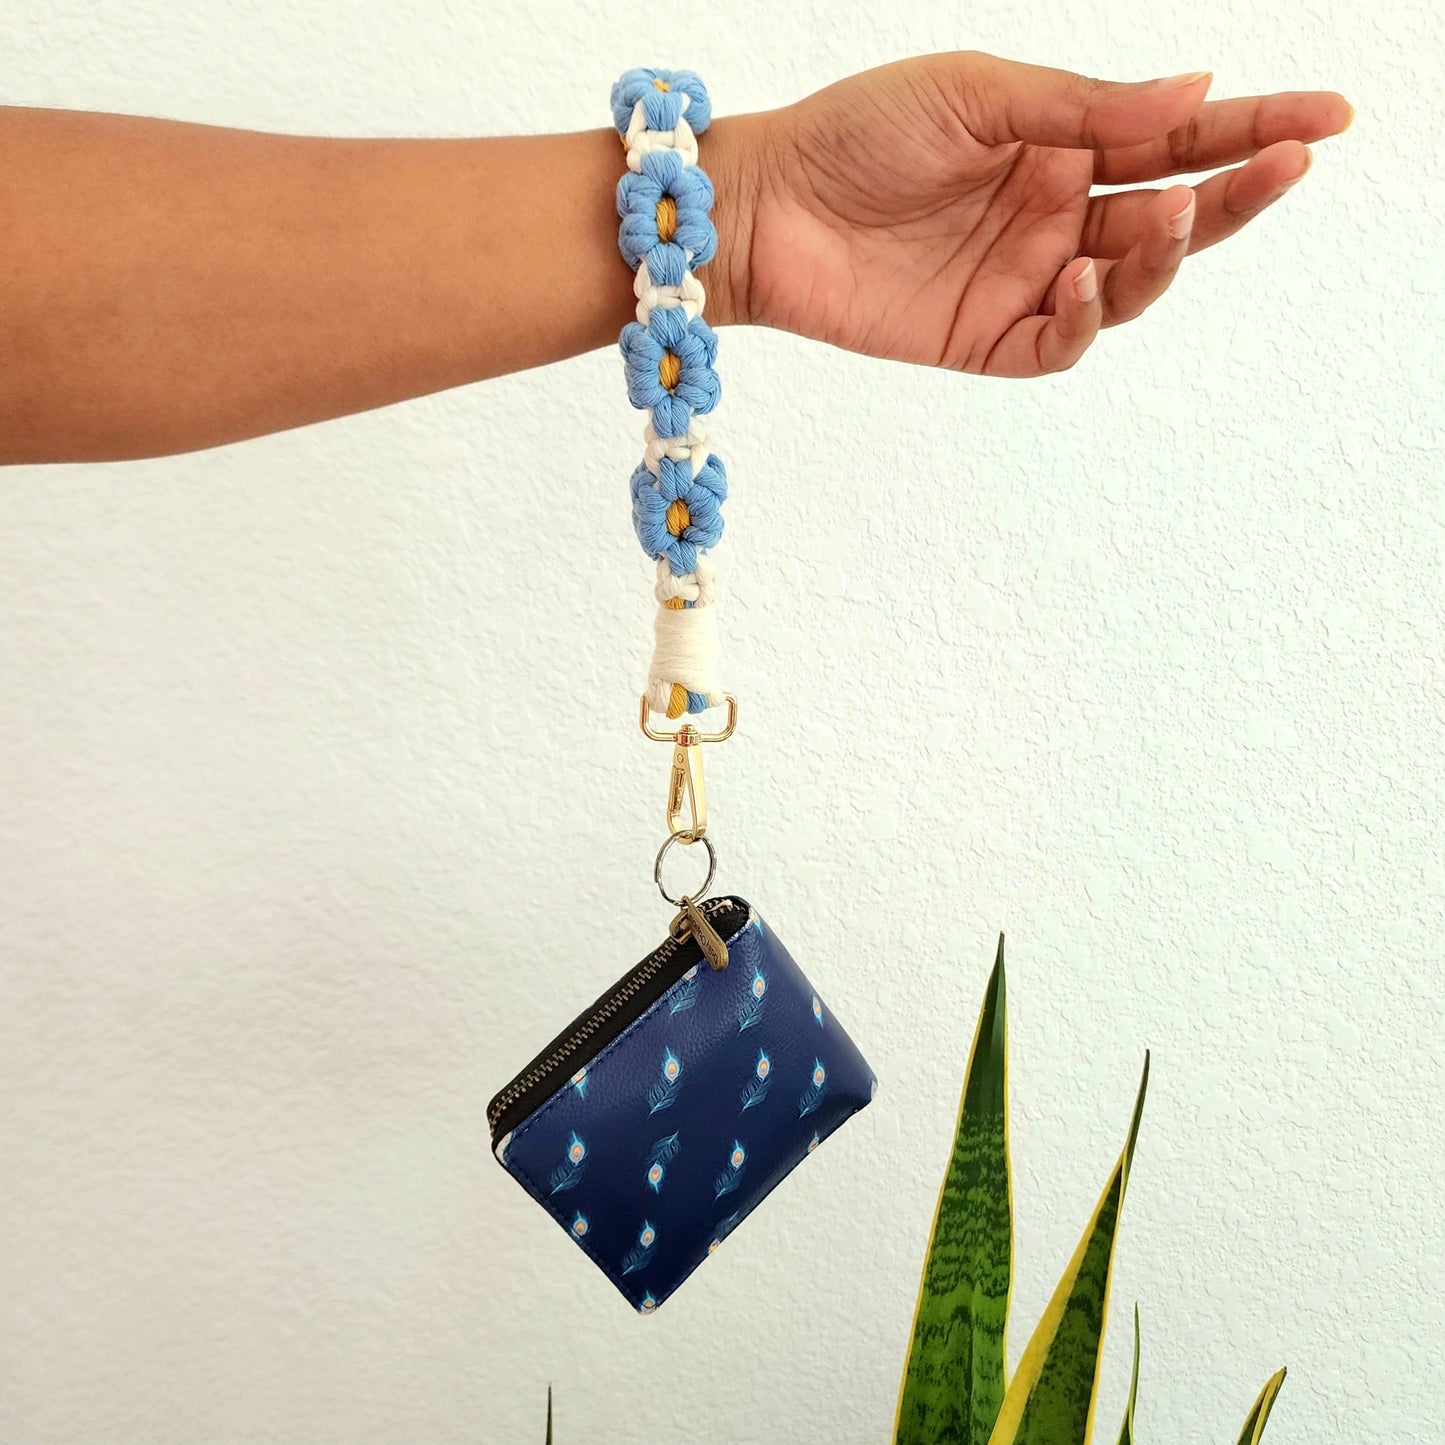 Load image into Gallery viewer, Macrame Daisy Flower Wristlet - Multiple Color Variations Available
